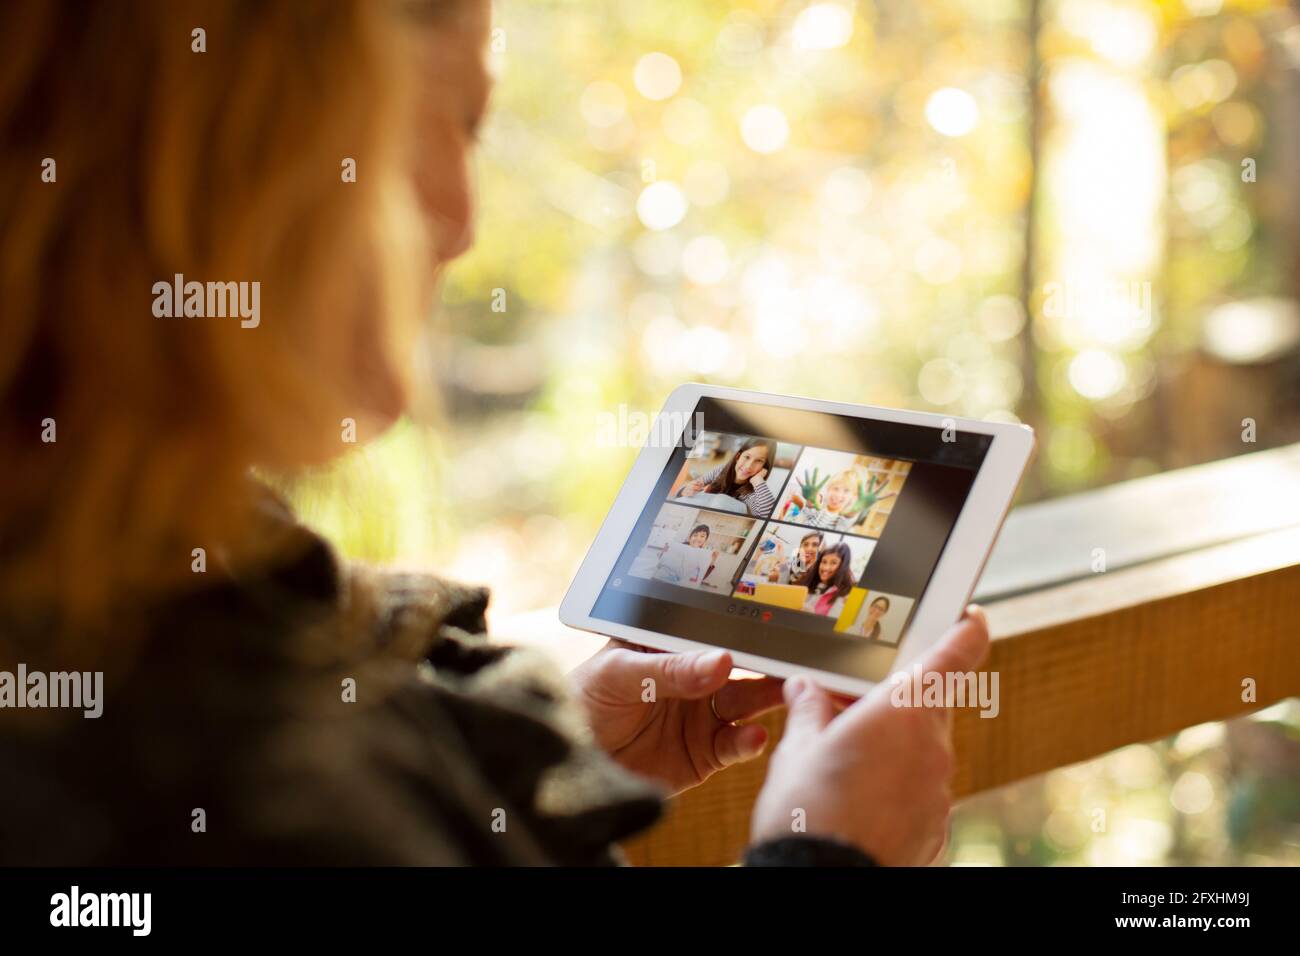 Woman video chatting with family on digital tablet screen Stock Photo